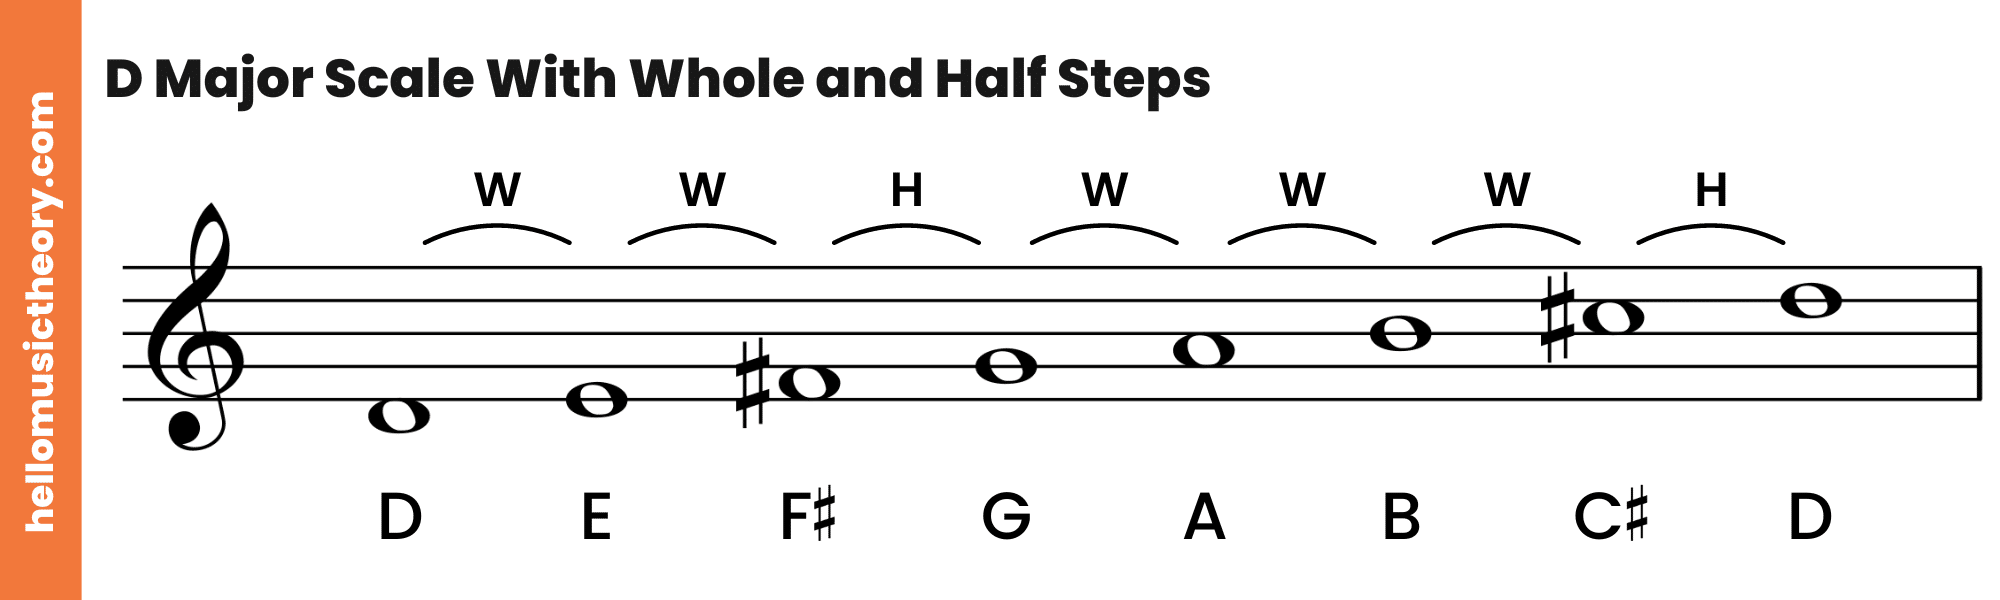 D Major Scale Treble Clef With Whole and Half Steps